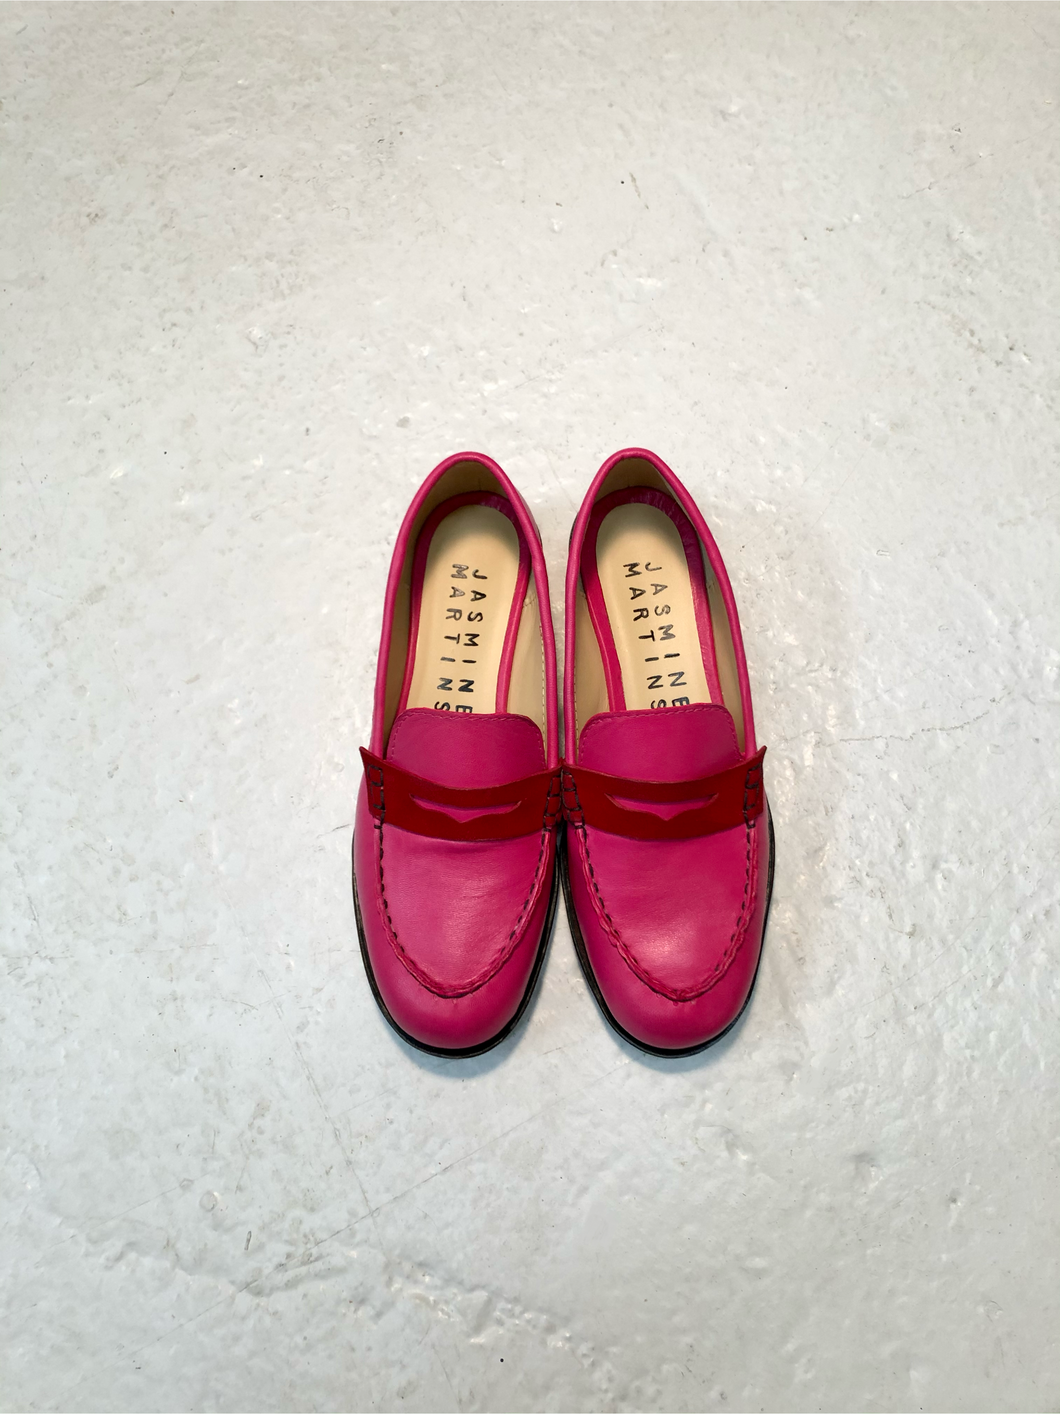 Penny Loafer - Fuchsia Pink